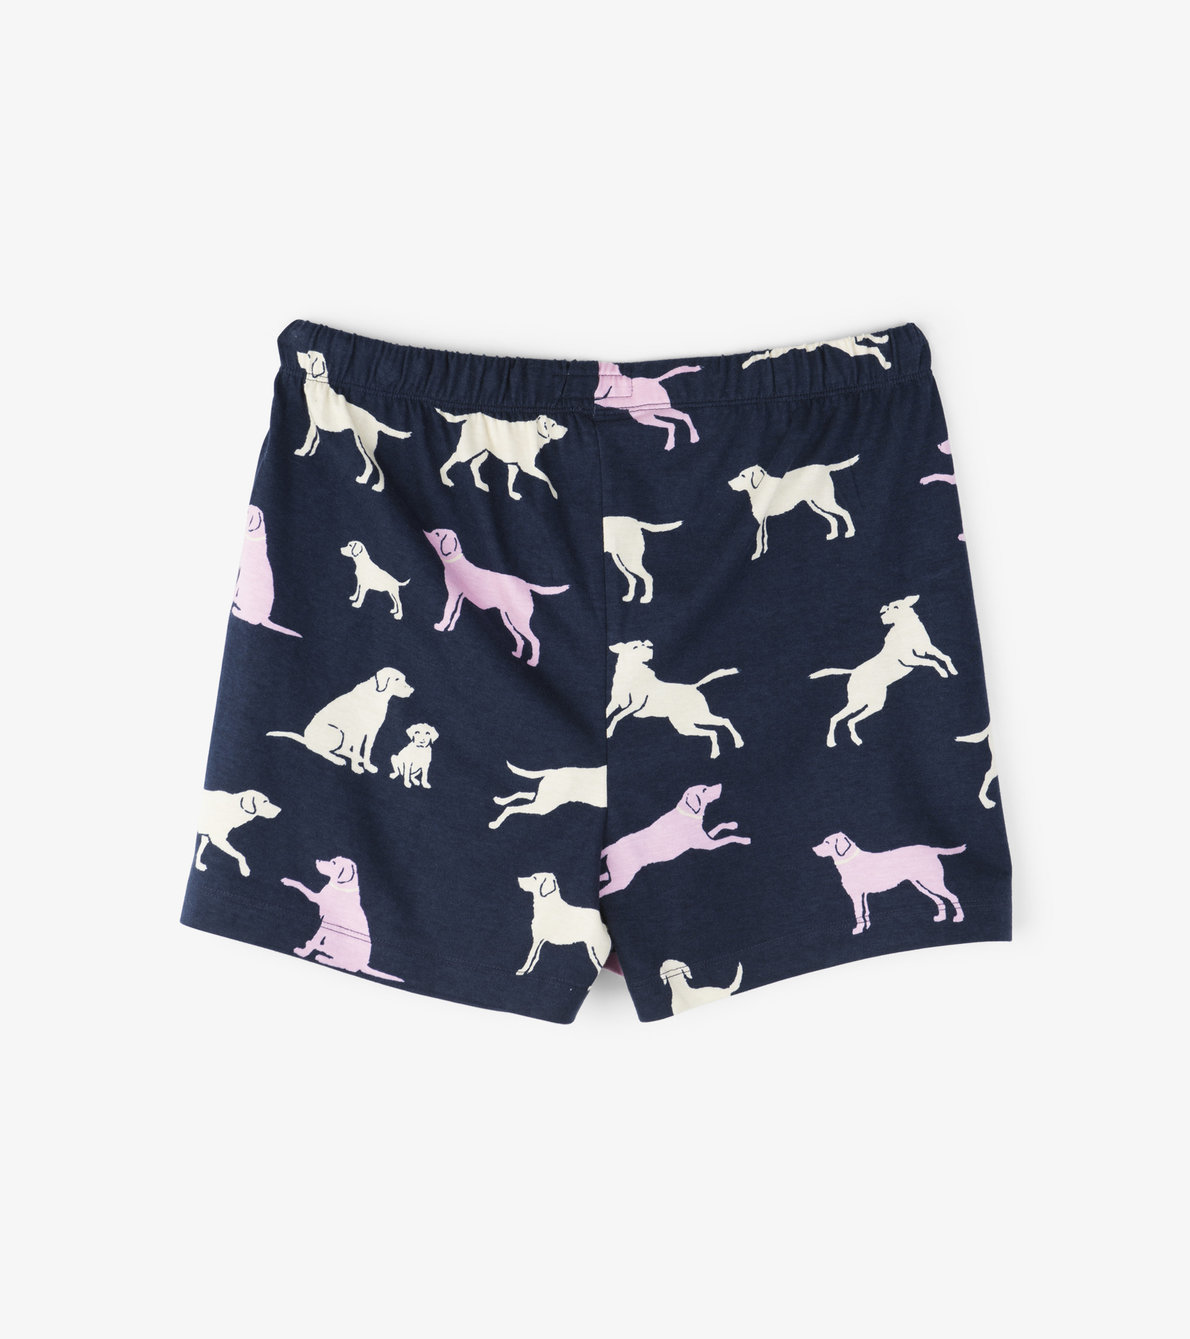 View larger image of Little Labs Women's Sleep Shorts